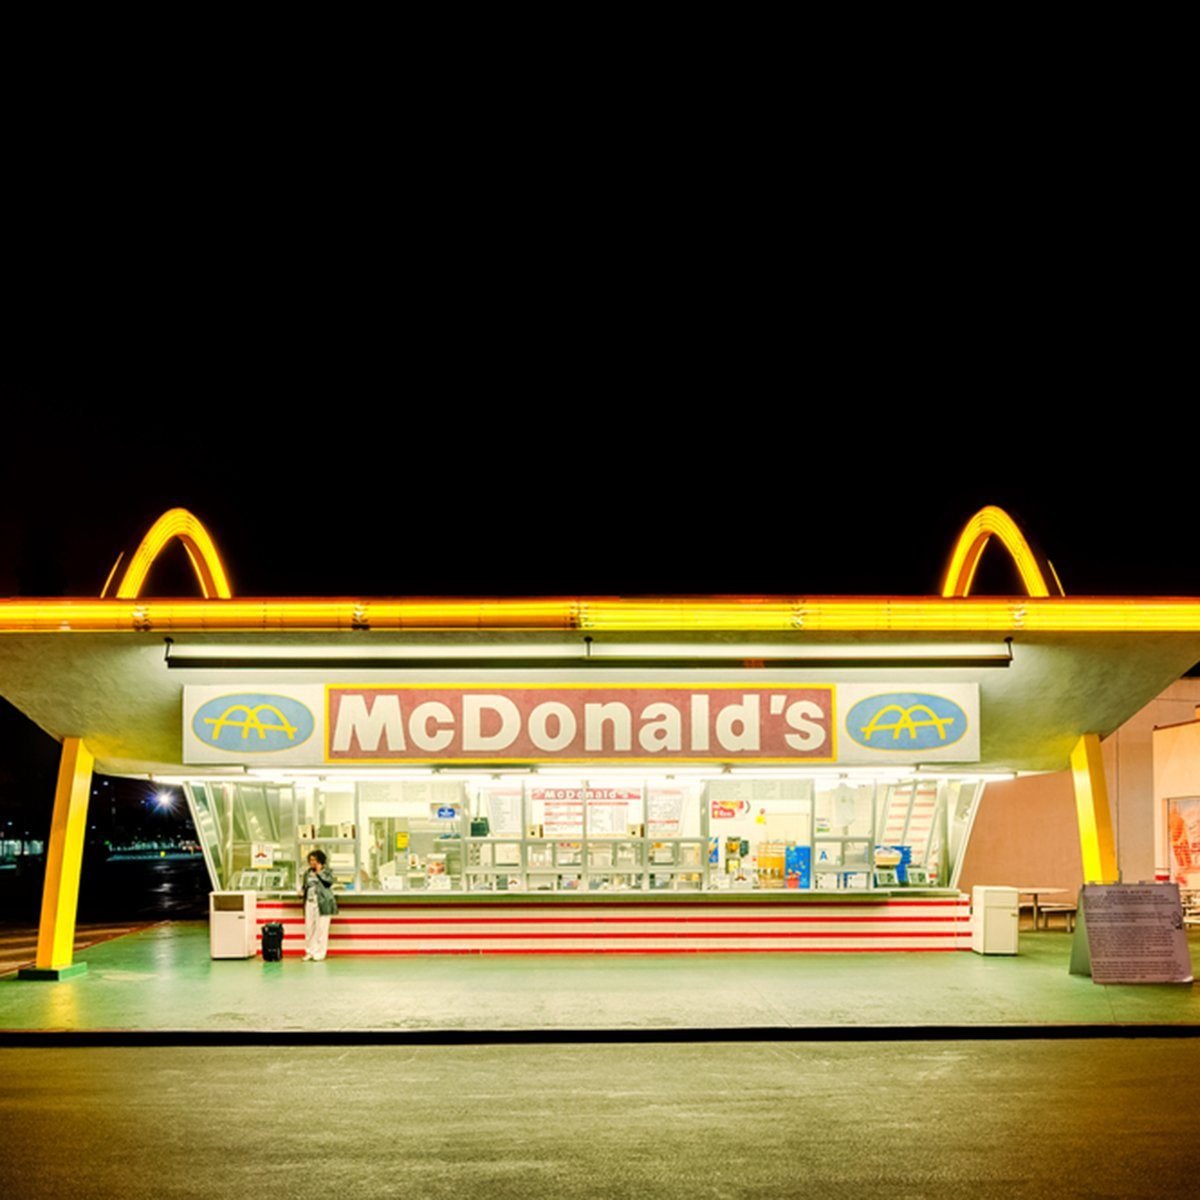 The oldest operating McDonald's restaurant in the world in Downey, Los Angeles, California